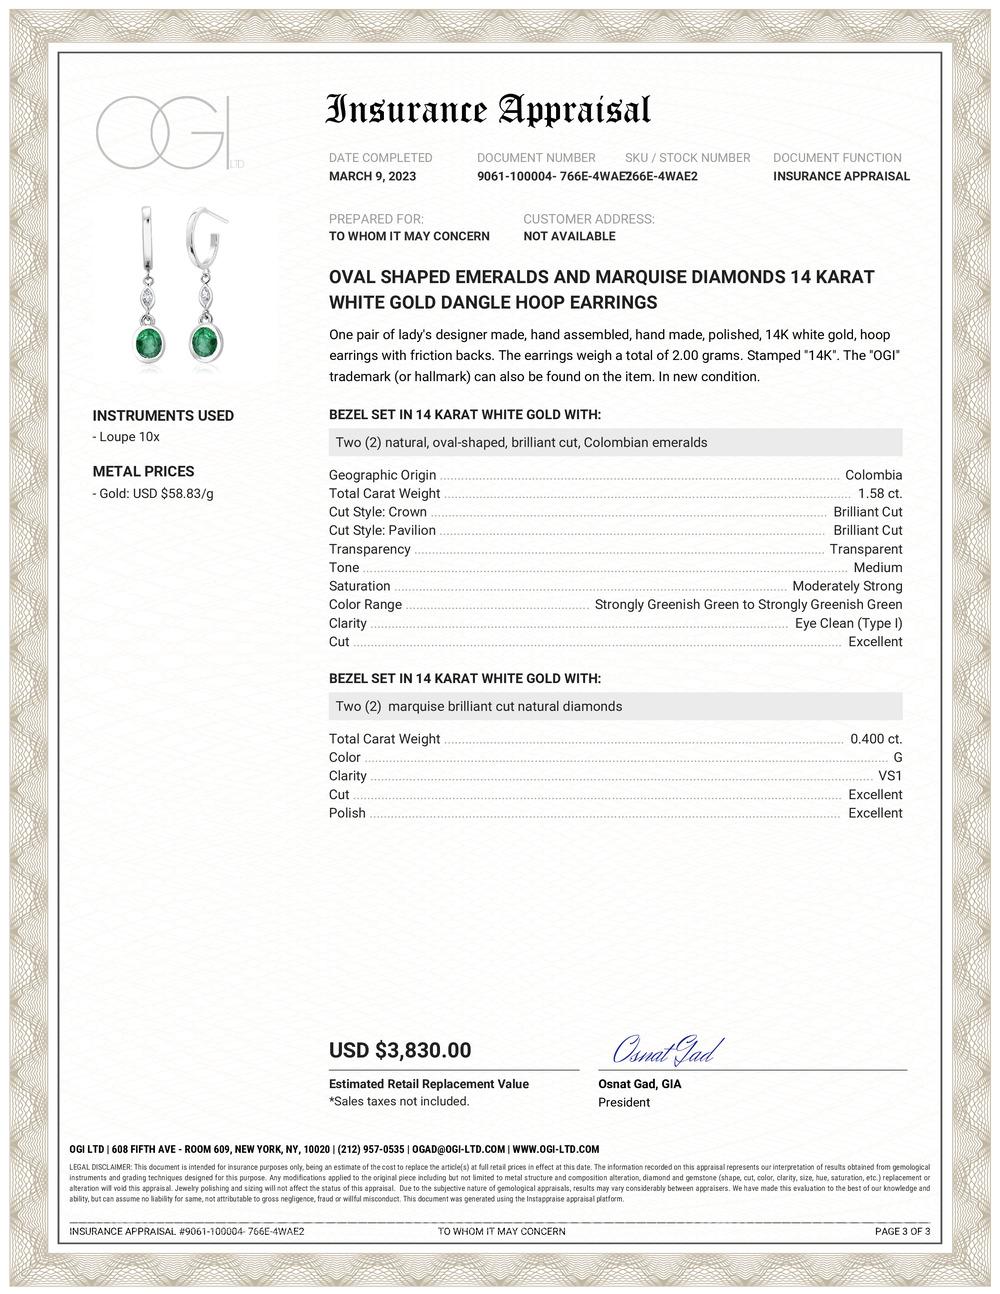 Fourteen karat white gold contemporary drop earrings 
Two marquise diamond weighing 0.40 carats elegantly creating sparkle and shine to the drop earrings
Two oval shaped emeralds weighing 1.58 carat 
Fine quality emeralds with the natural color hue